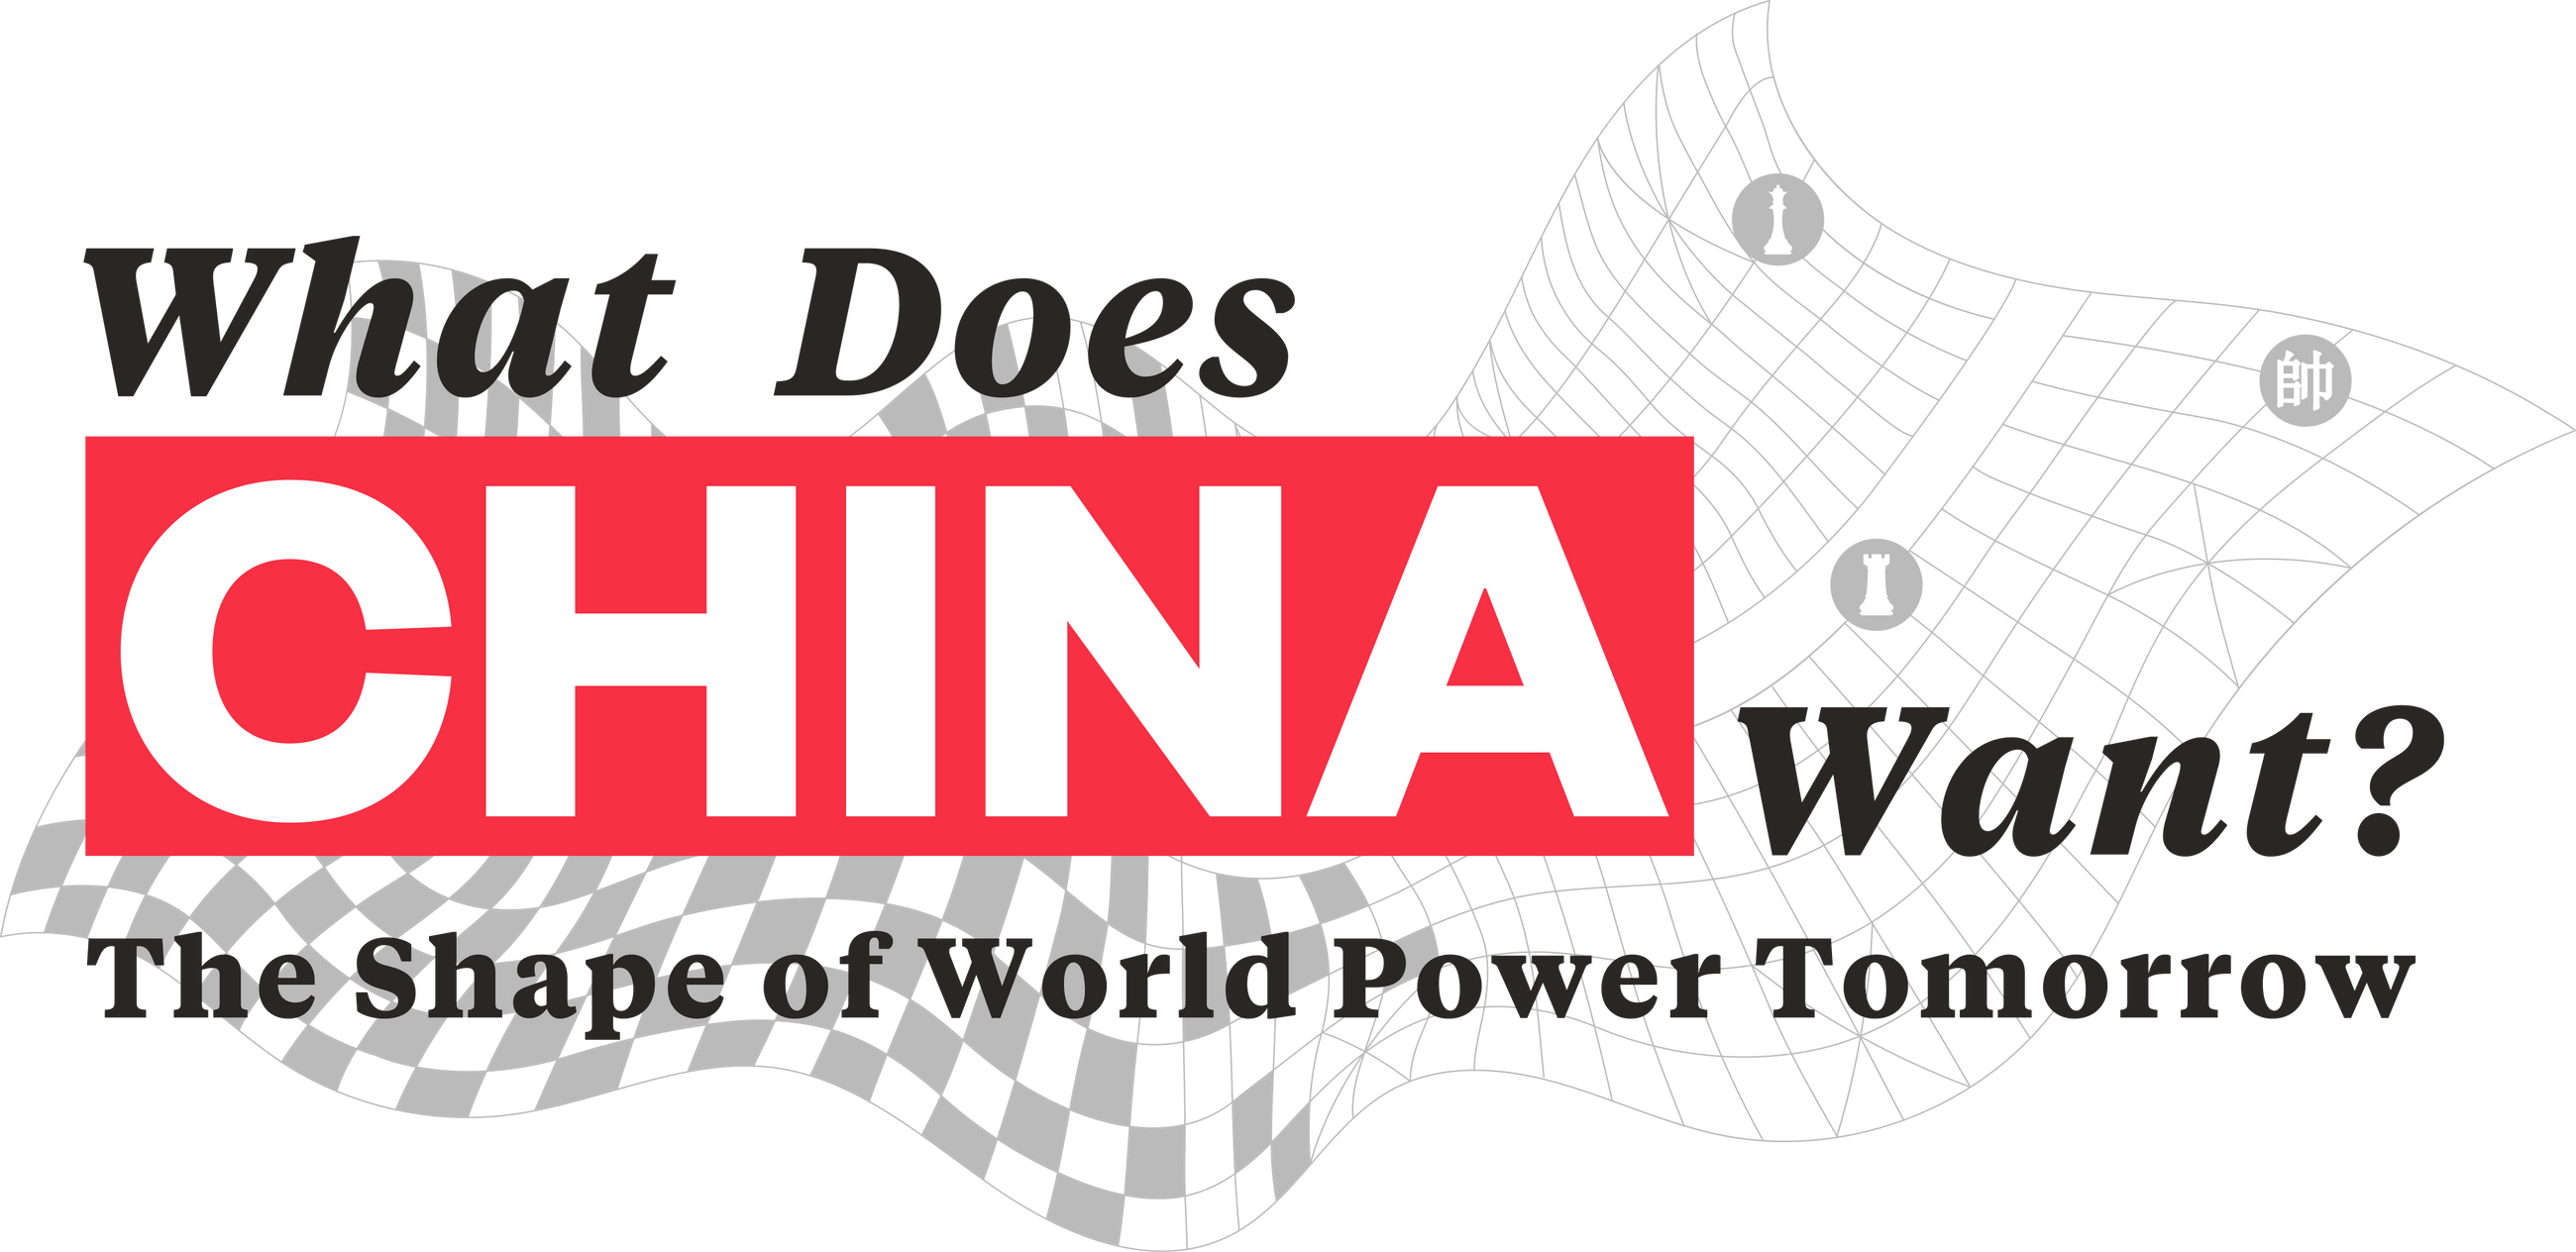 What Does China Want?